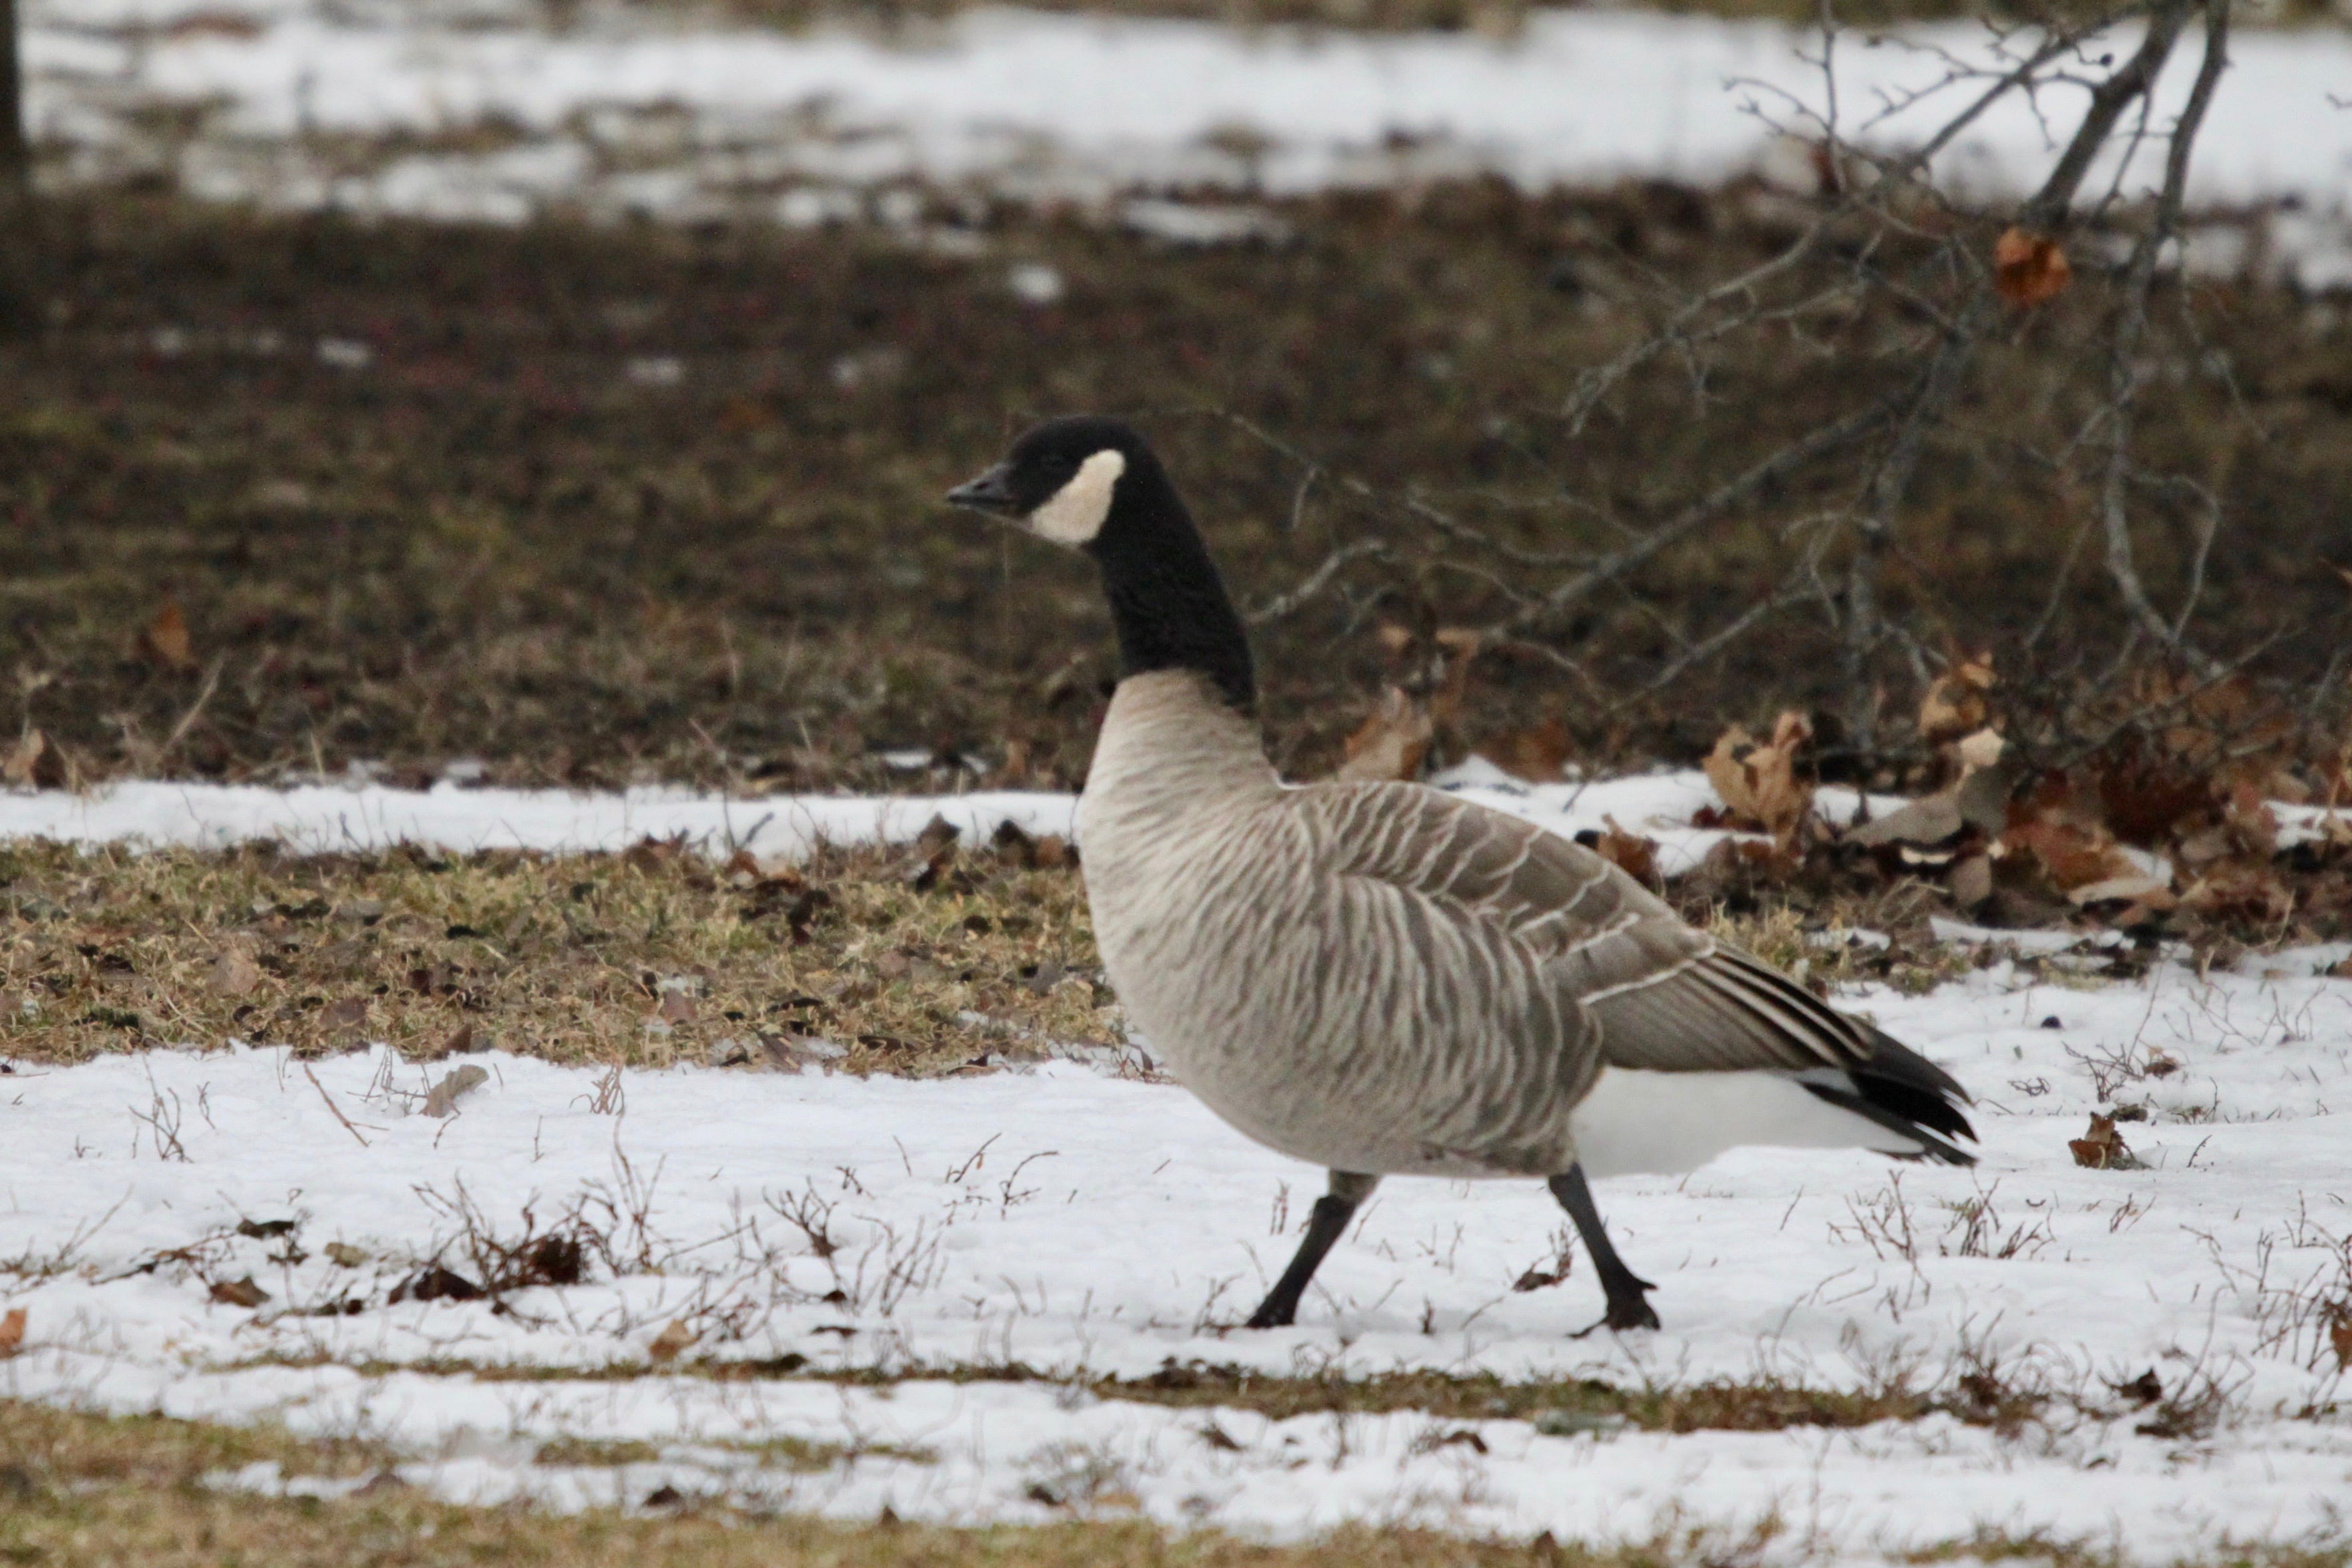 Identifying a Cackling Goose is far from a trivial pursuit